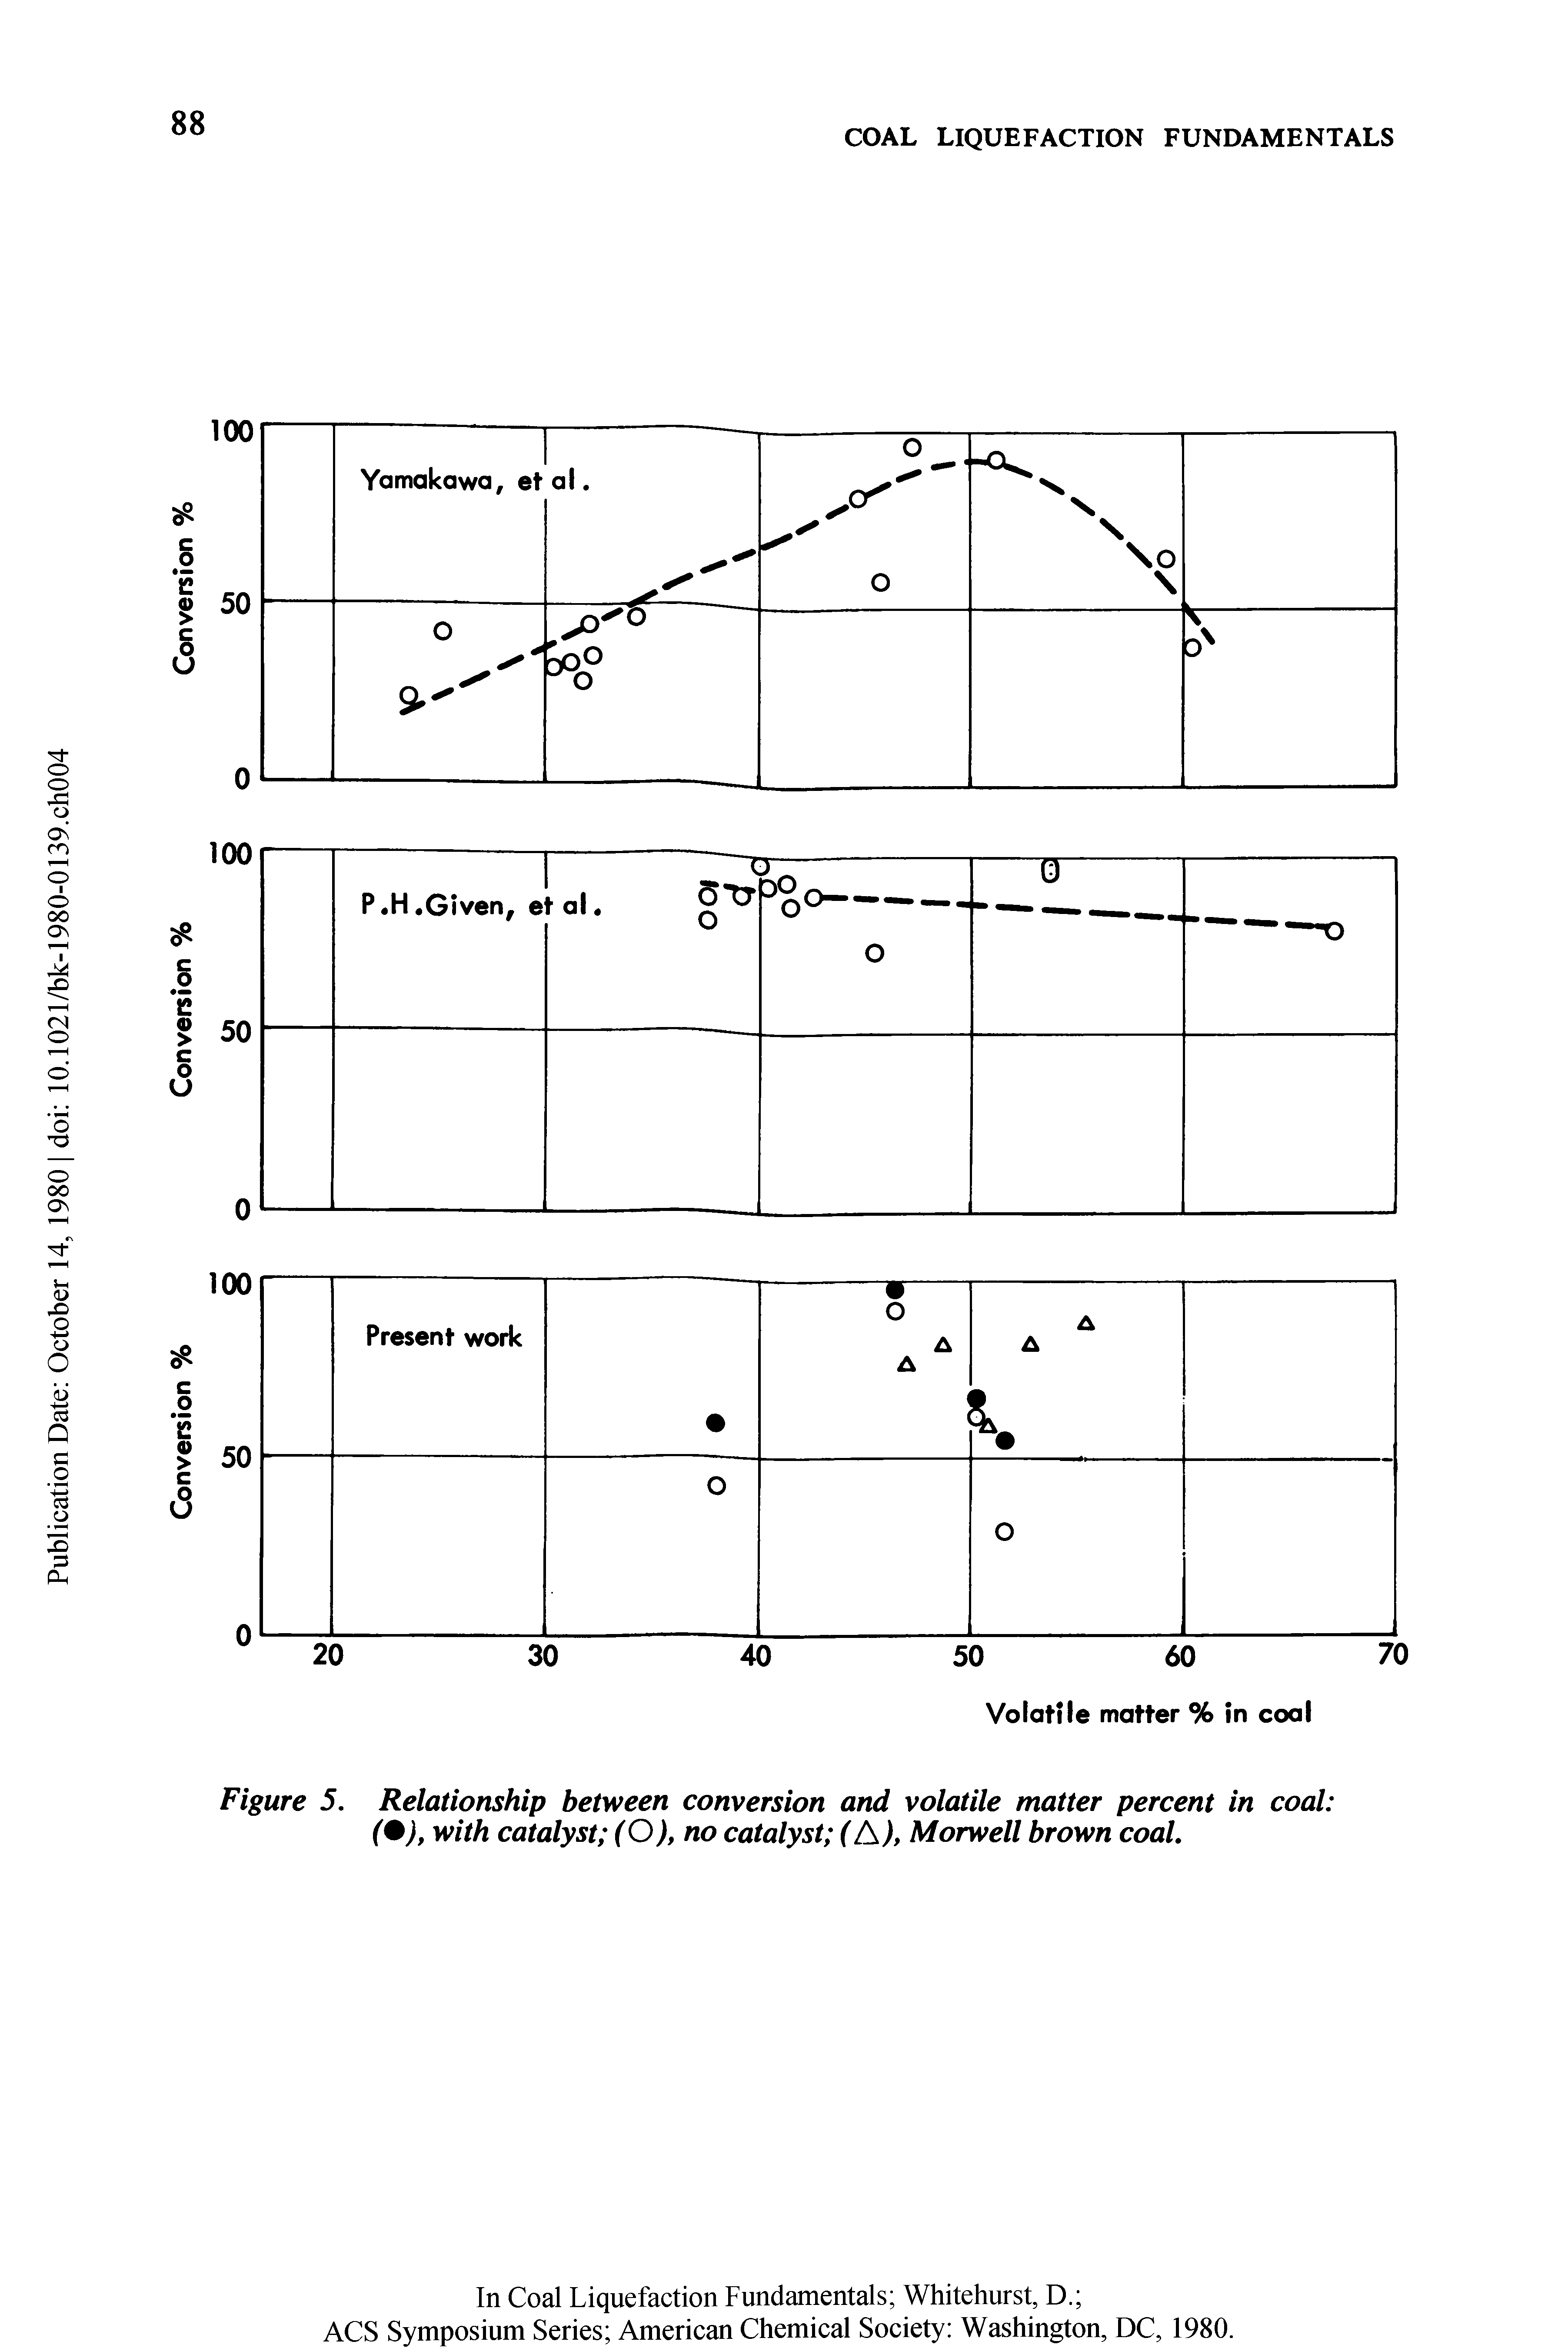 Figure 5. Relationship between conversion and volatile matter percent in coal (9), with catalyst (O), no catalyst (A), Morwell brown coal.